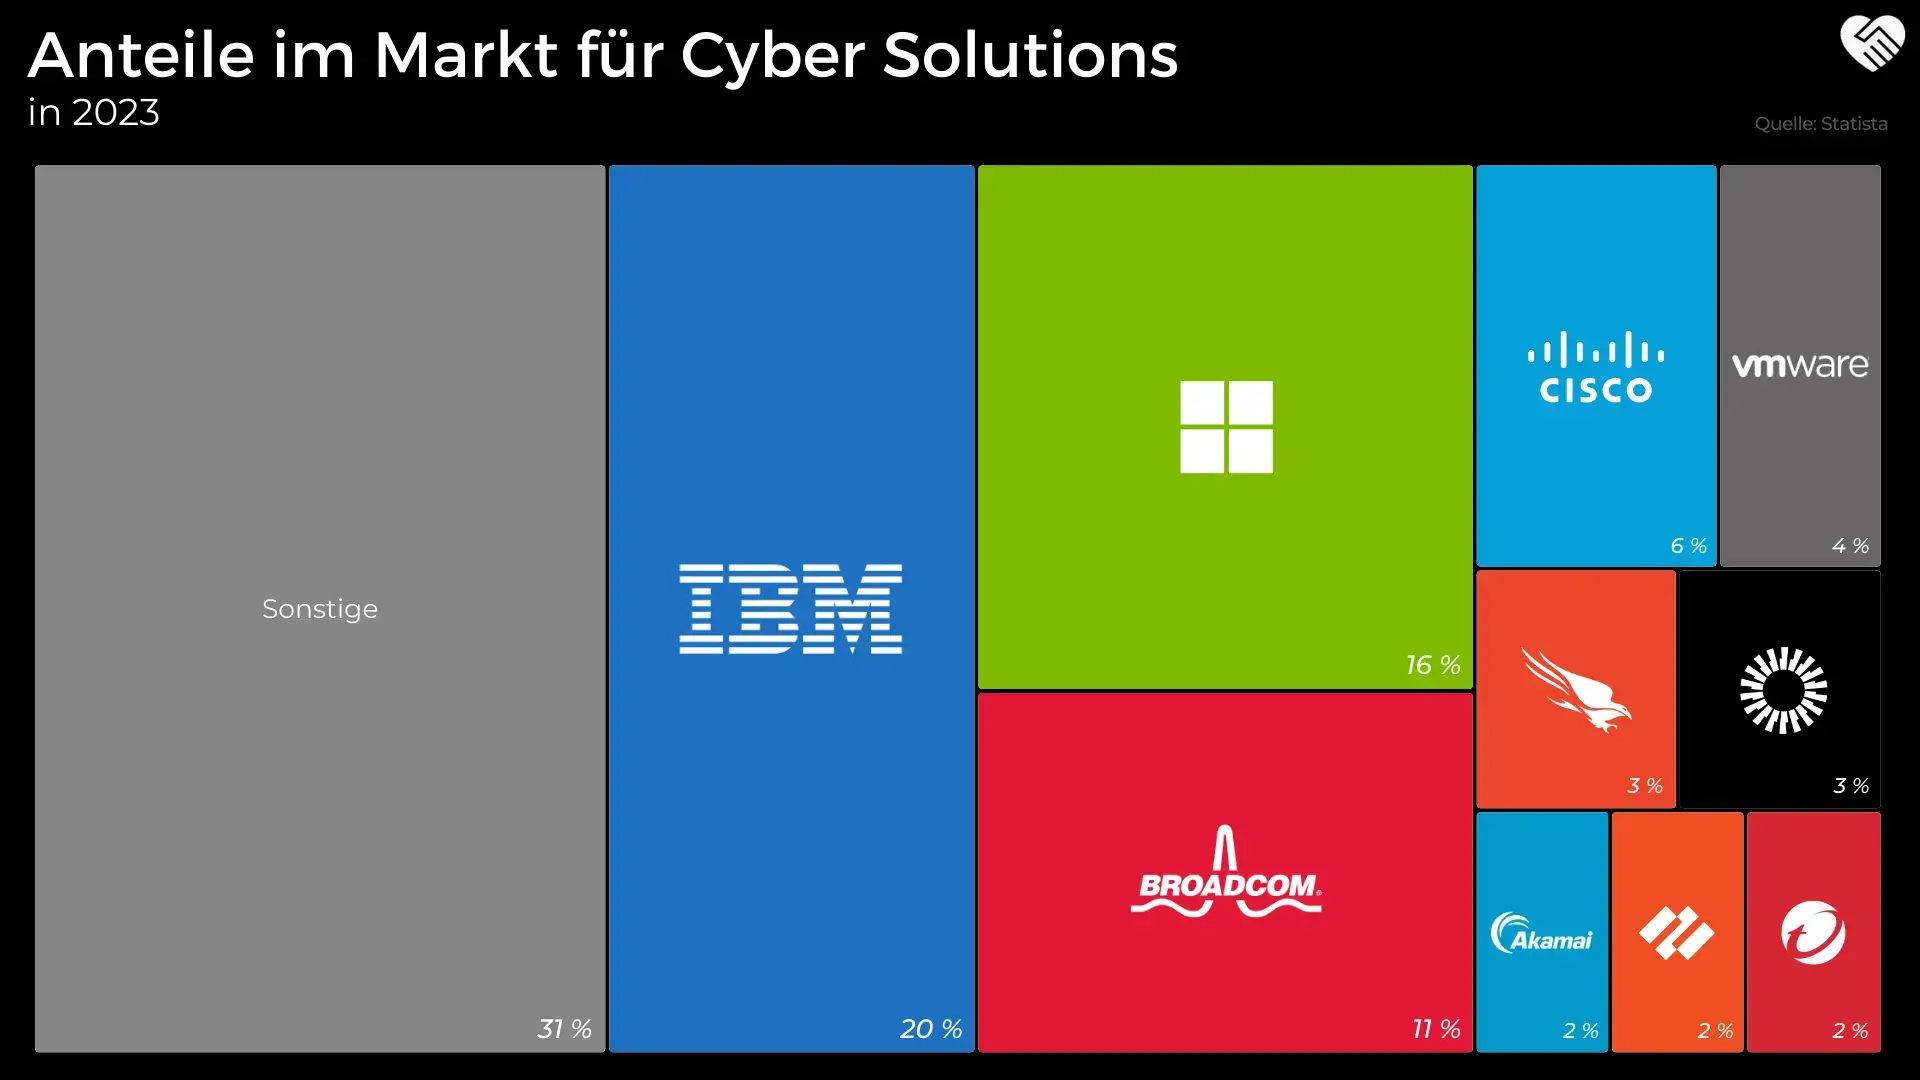 Anteile im Cybersecurity Markt an Cyber Solutions